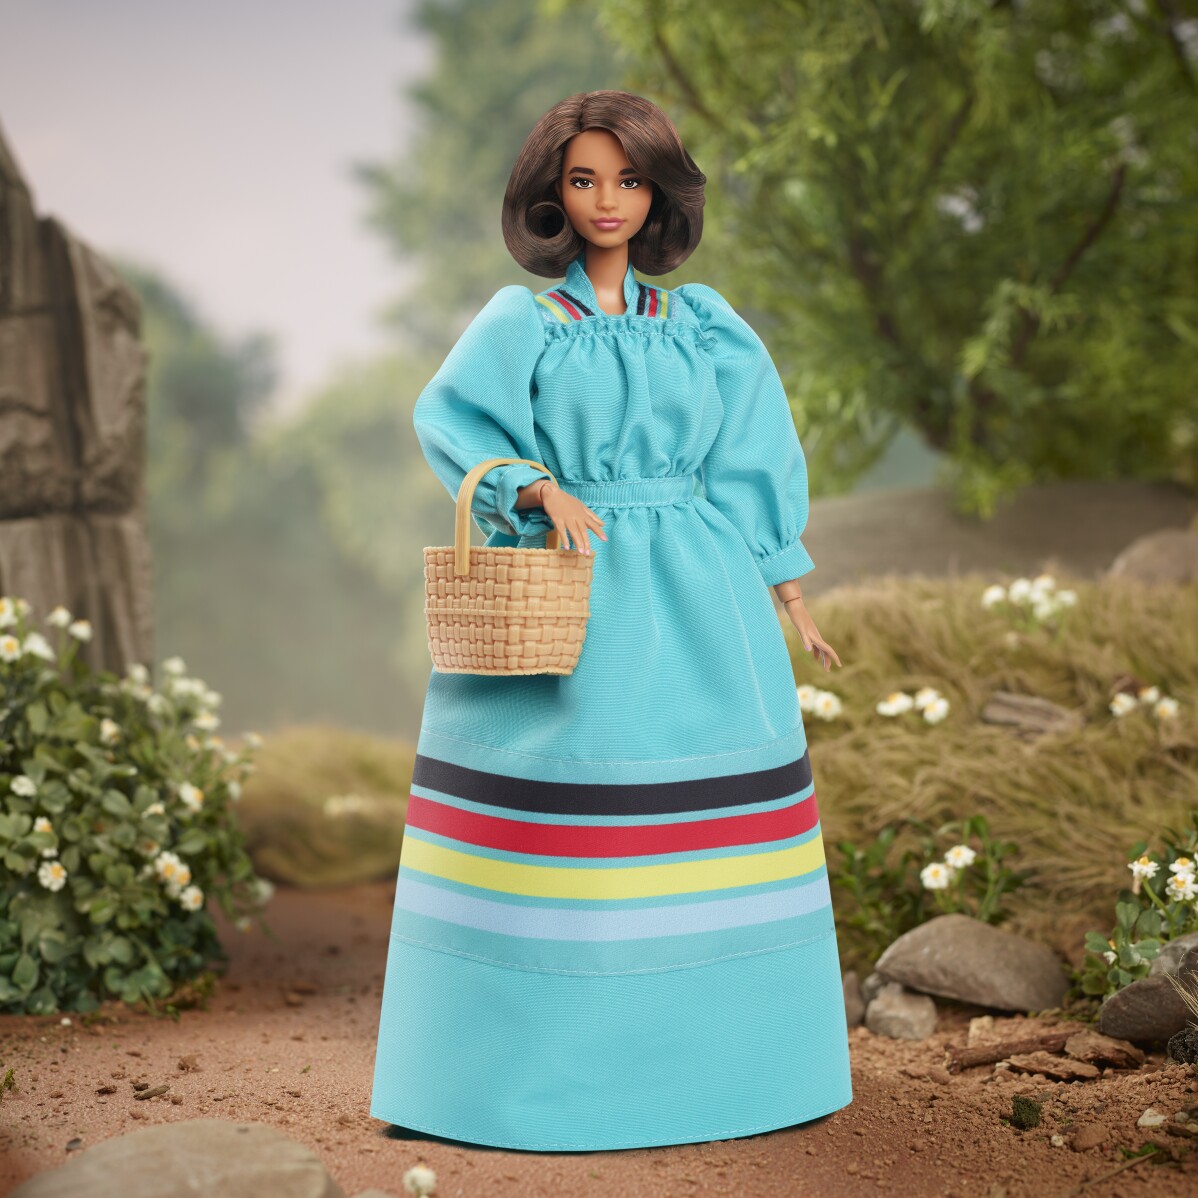 You are currently viewing Barbie doll honoring Cherokee Nation leader Wilma Mankiller is met with mixed emotions